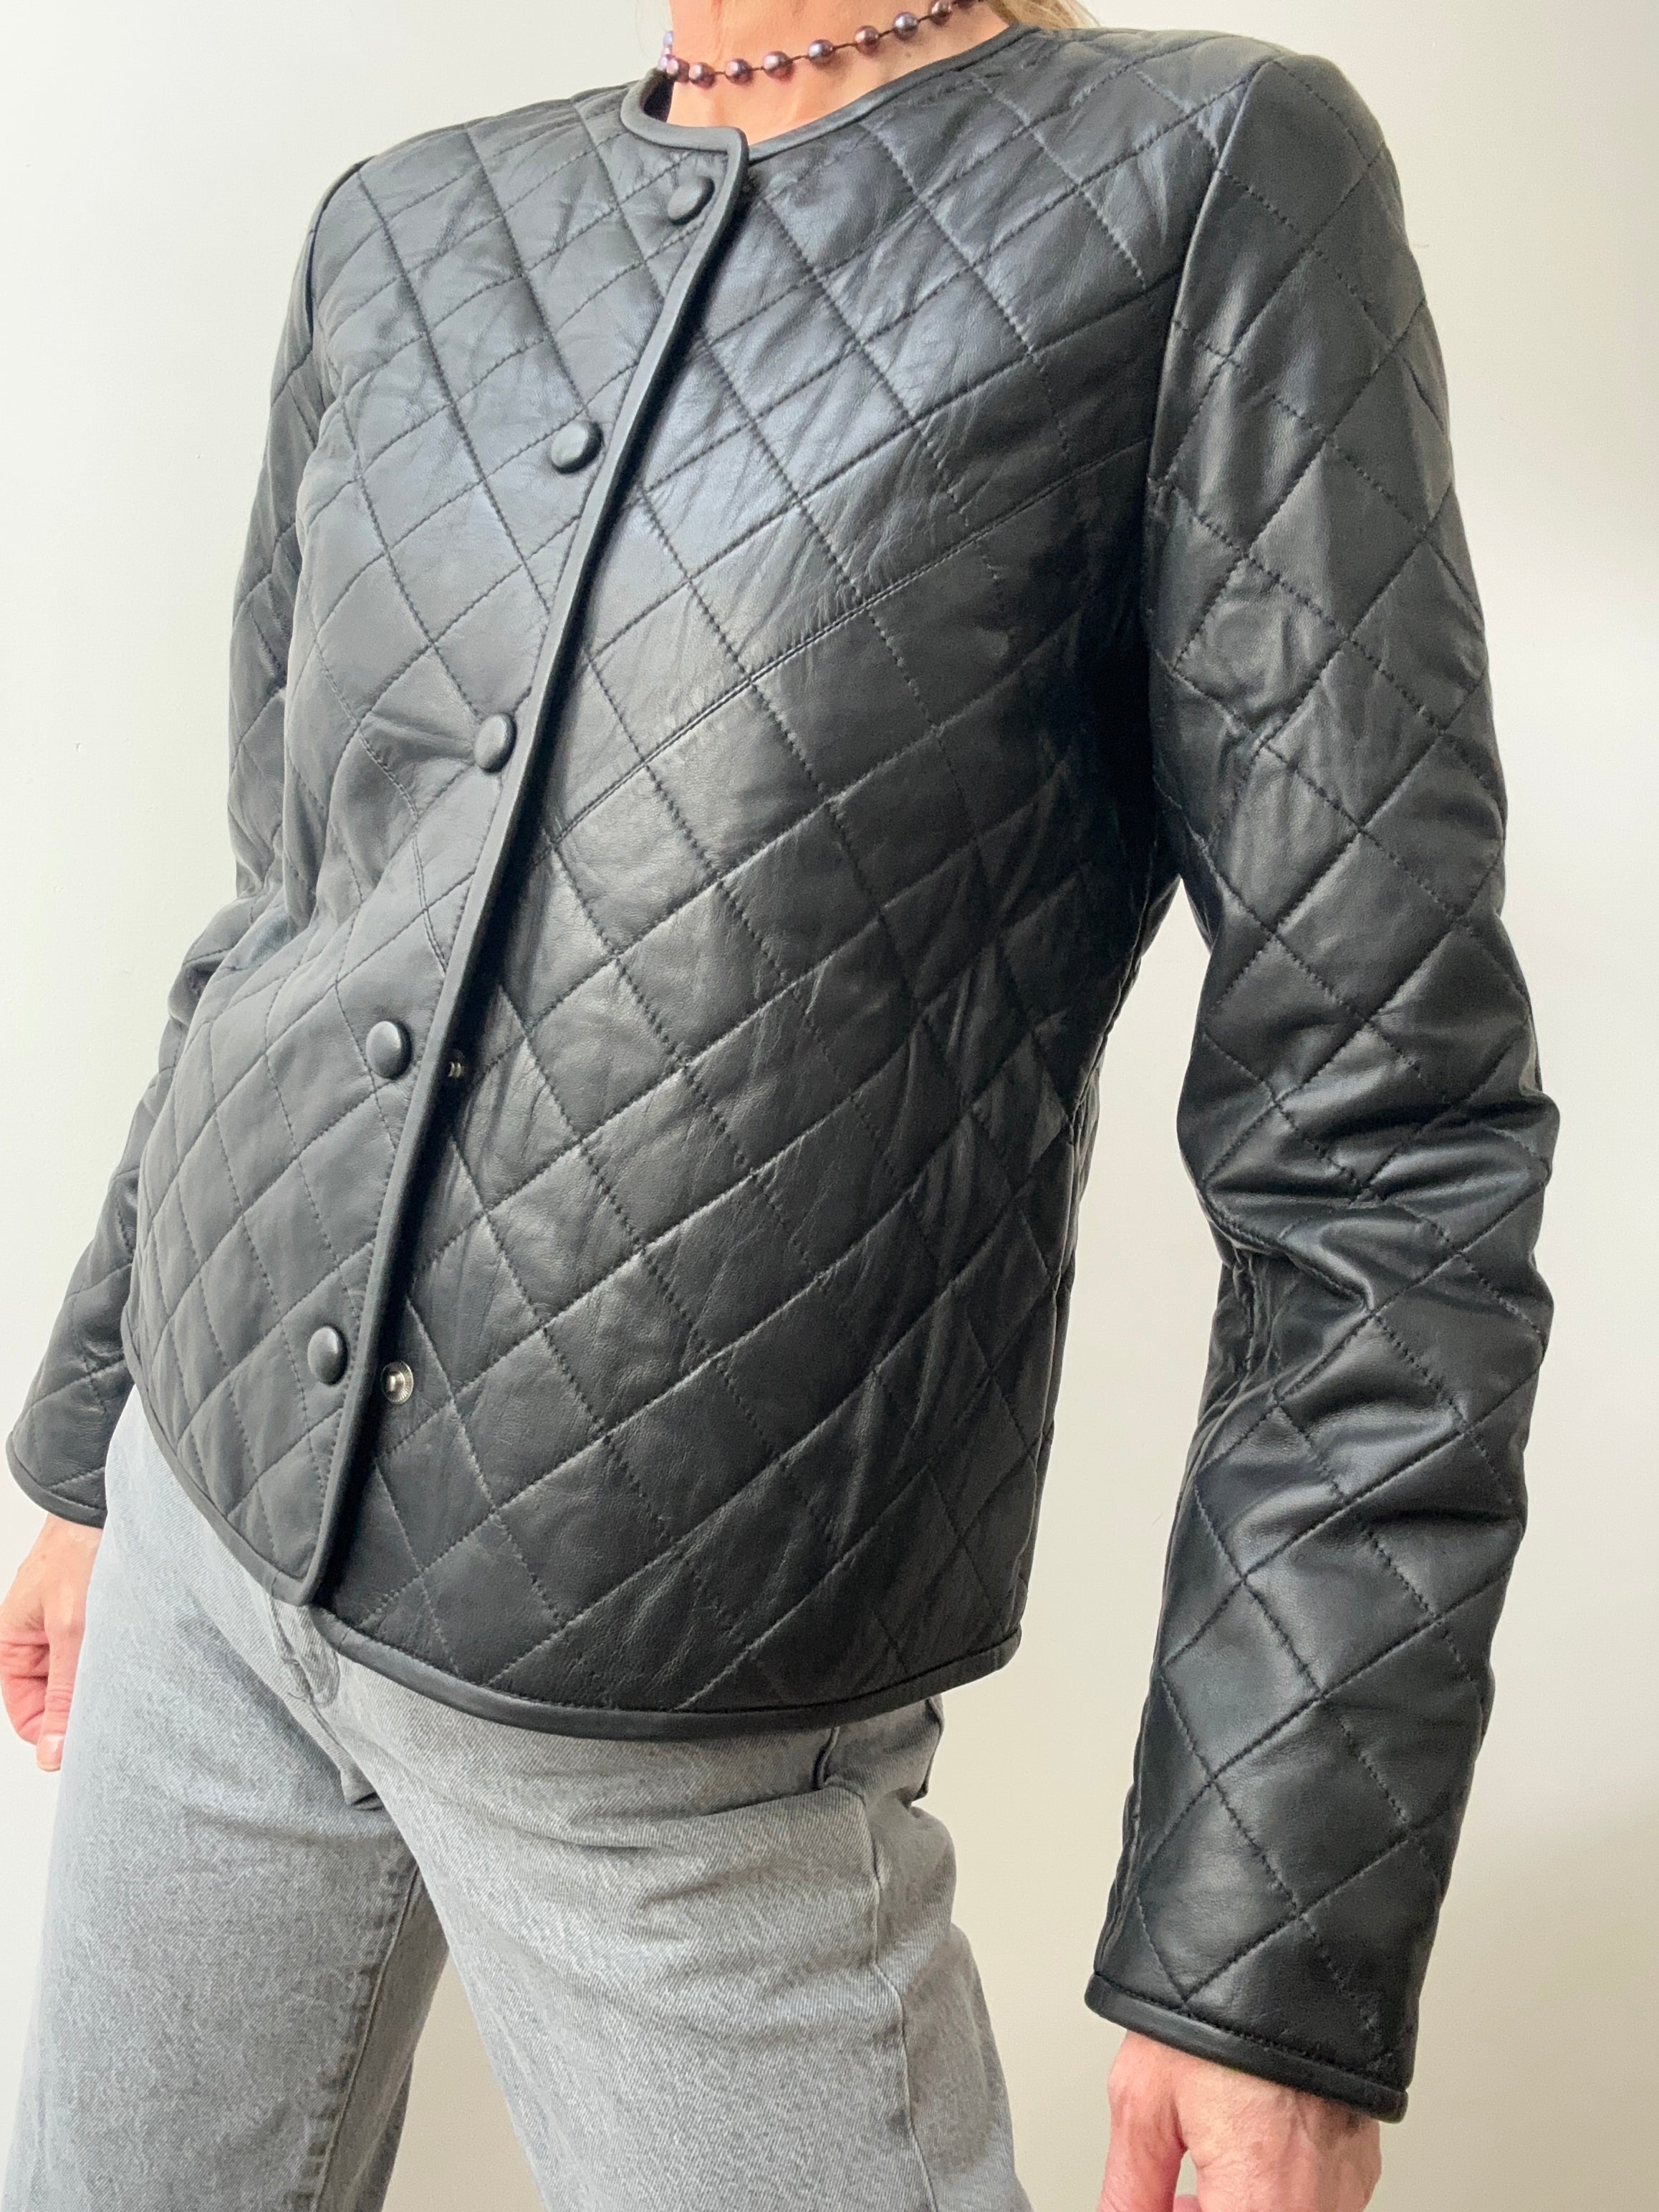 Caroll Paris Jackets Quilted Leather Jacket Black